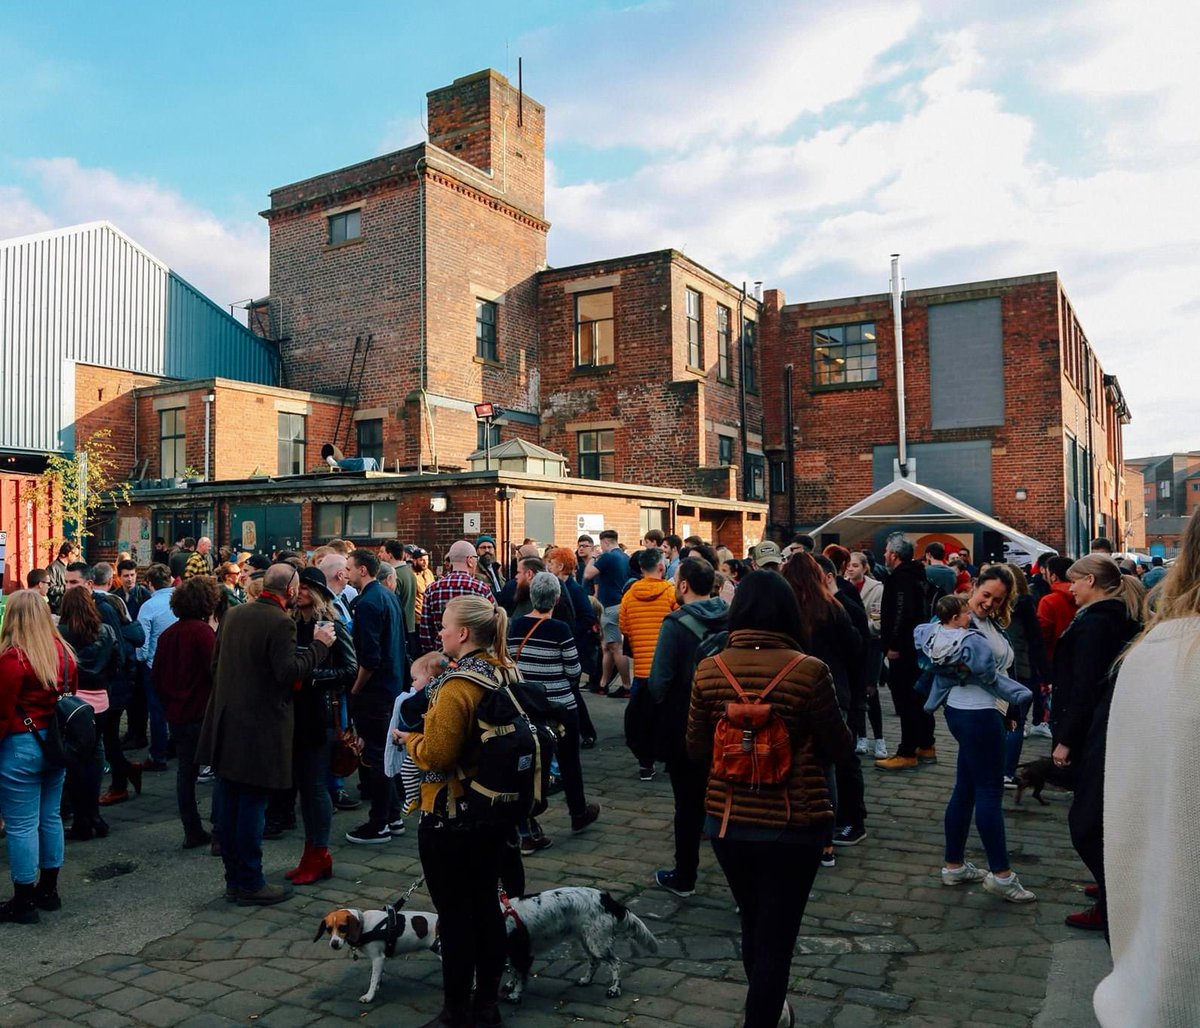 There are LOADS of great market events happening in #Sheffield over coming weeks! For starters, there’s two tomorrow (Sunday 21 April) with the return of Sharrow Vale Market @ValeSharrow and the April edition of @pollenmarket. See the full rundown of upcoming events:…